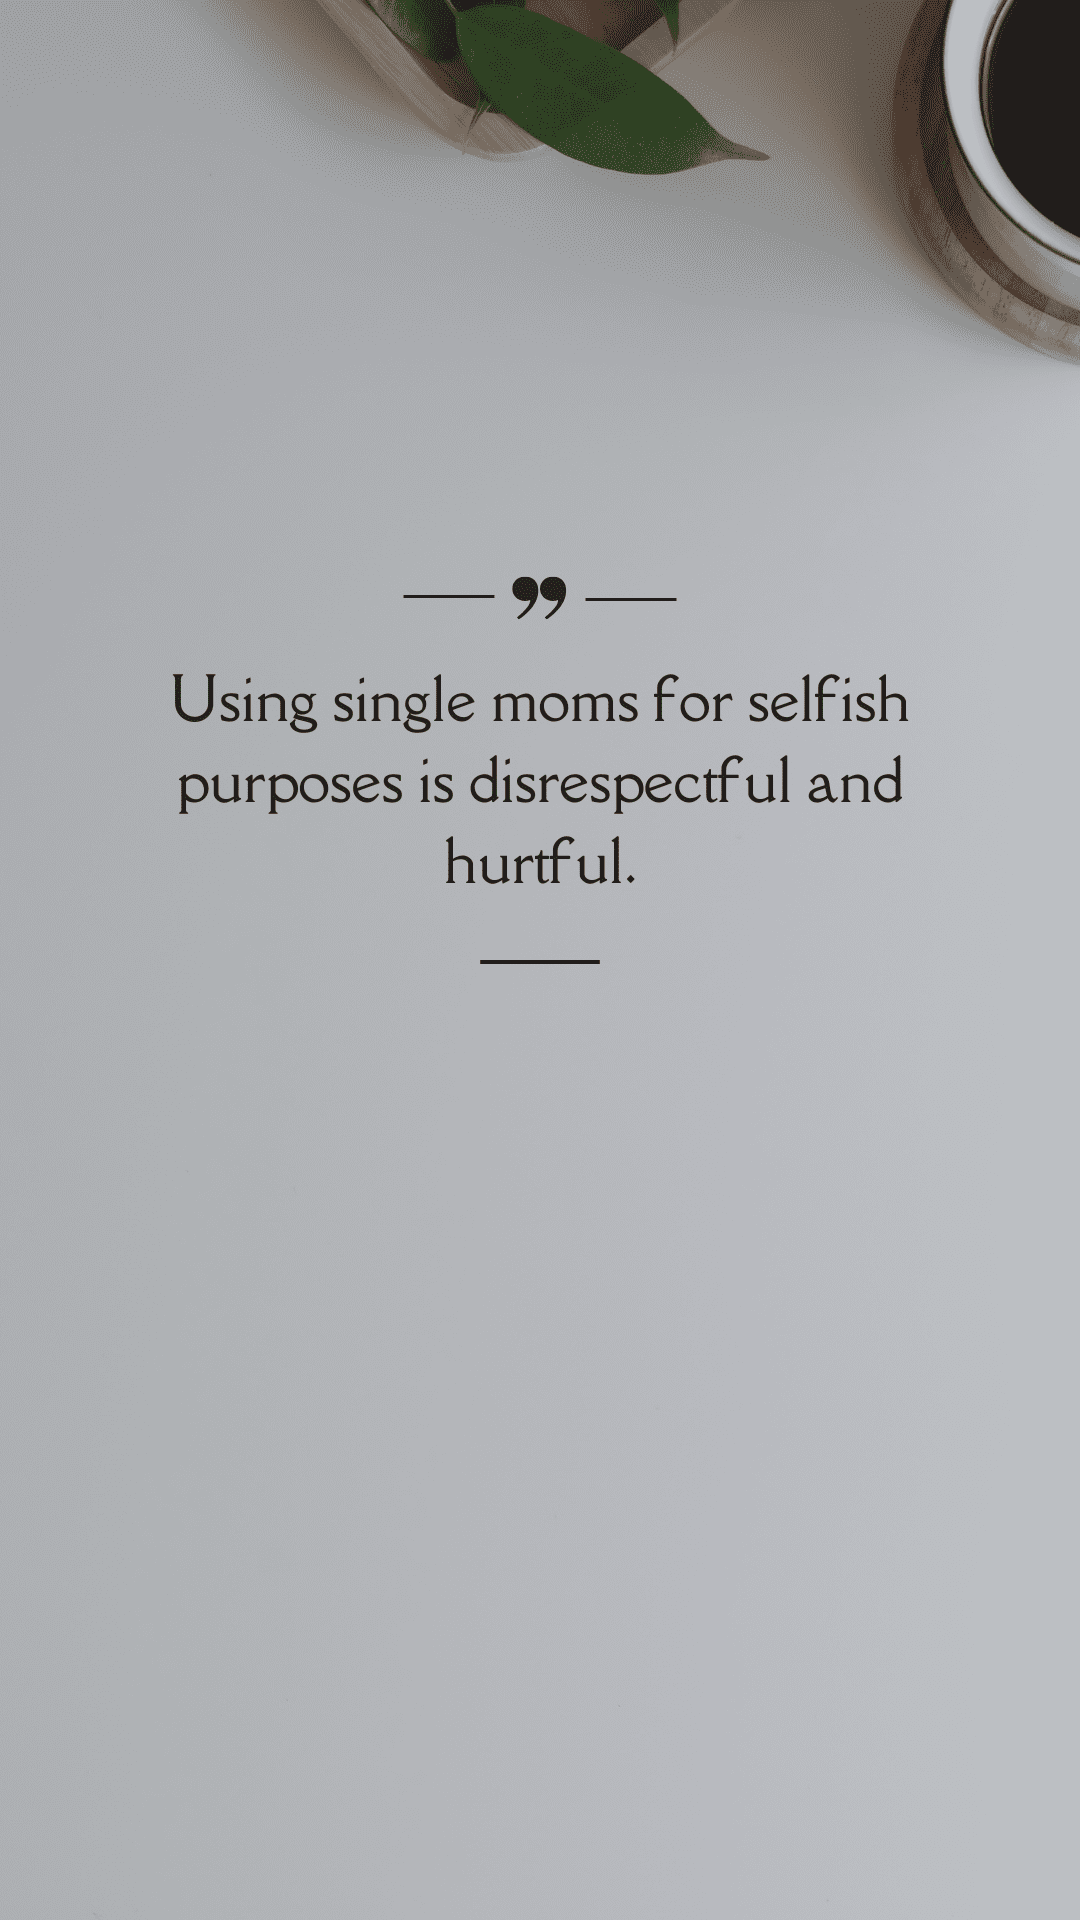 Using single moms for selfish purposes is disrespectful and hurtful.(Quote)